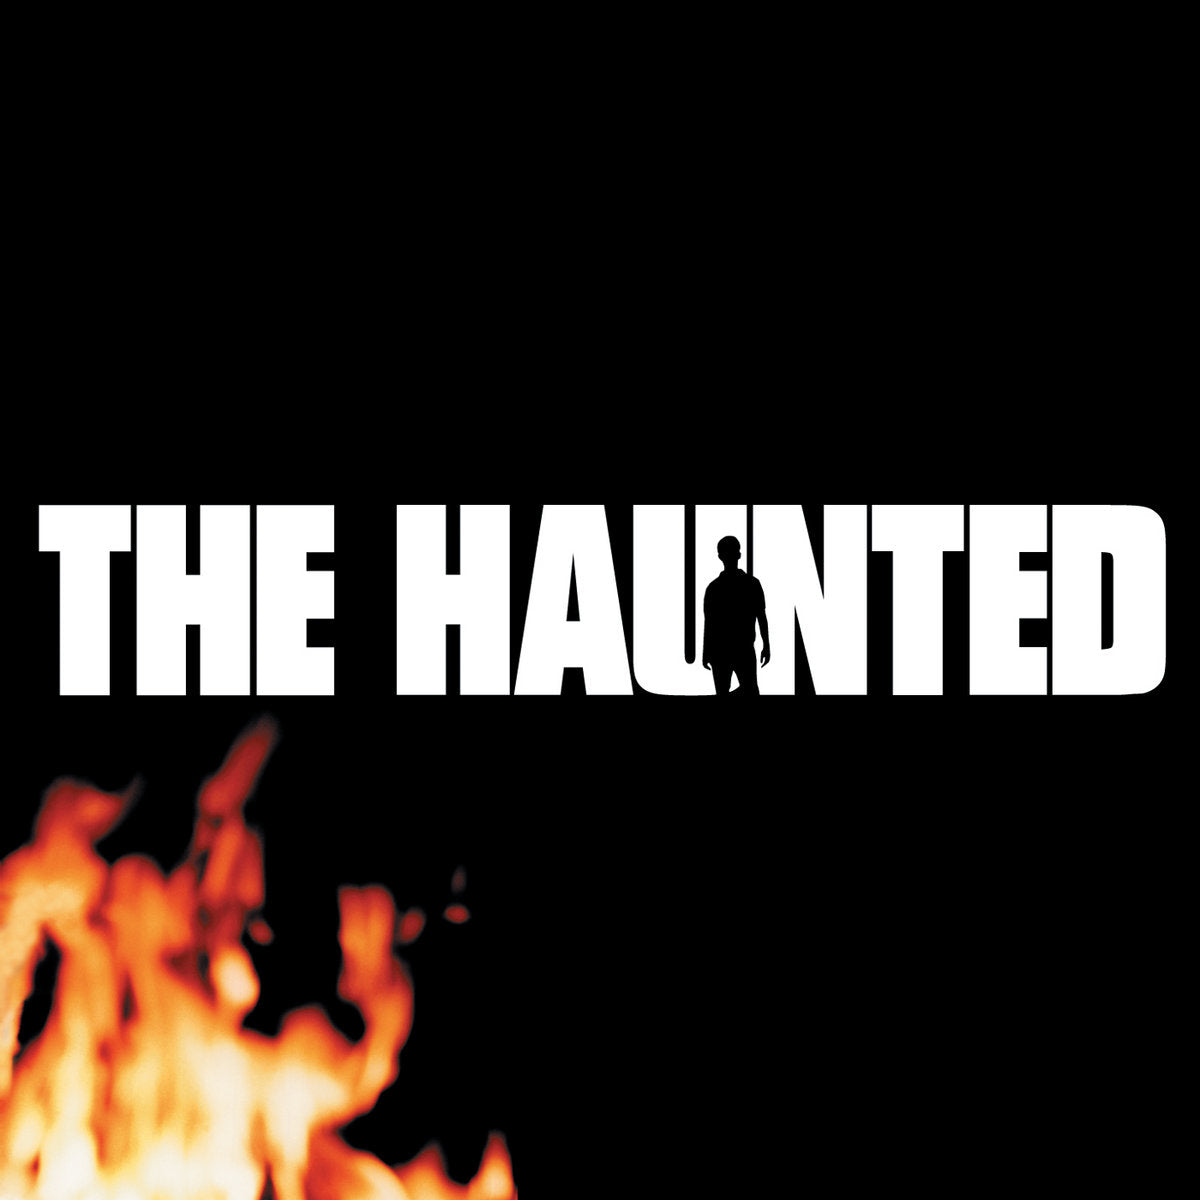 The Haunted "The Haunted" Digital Download